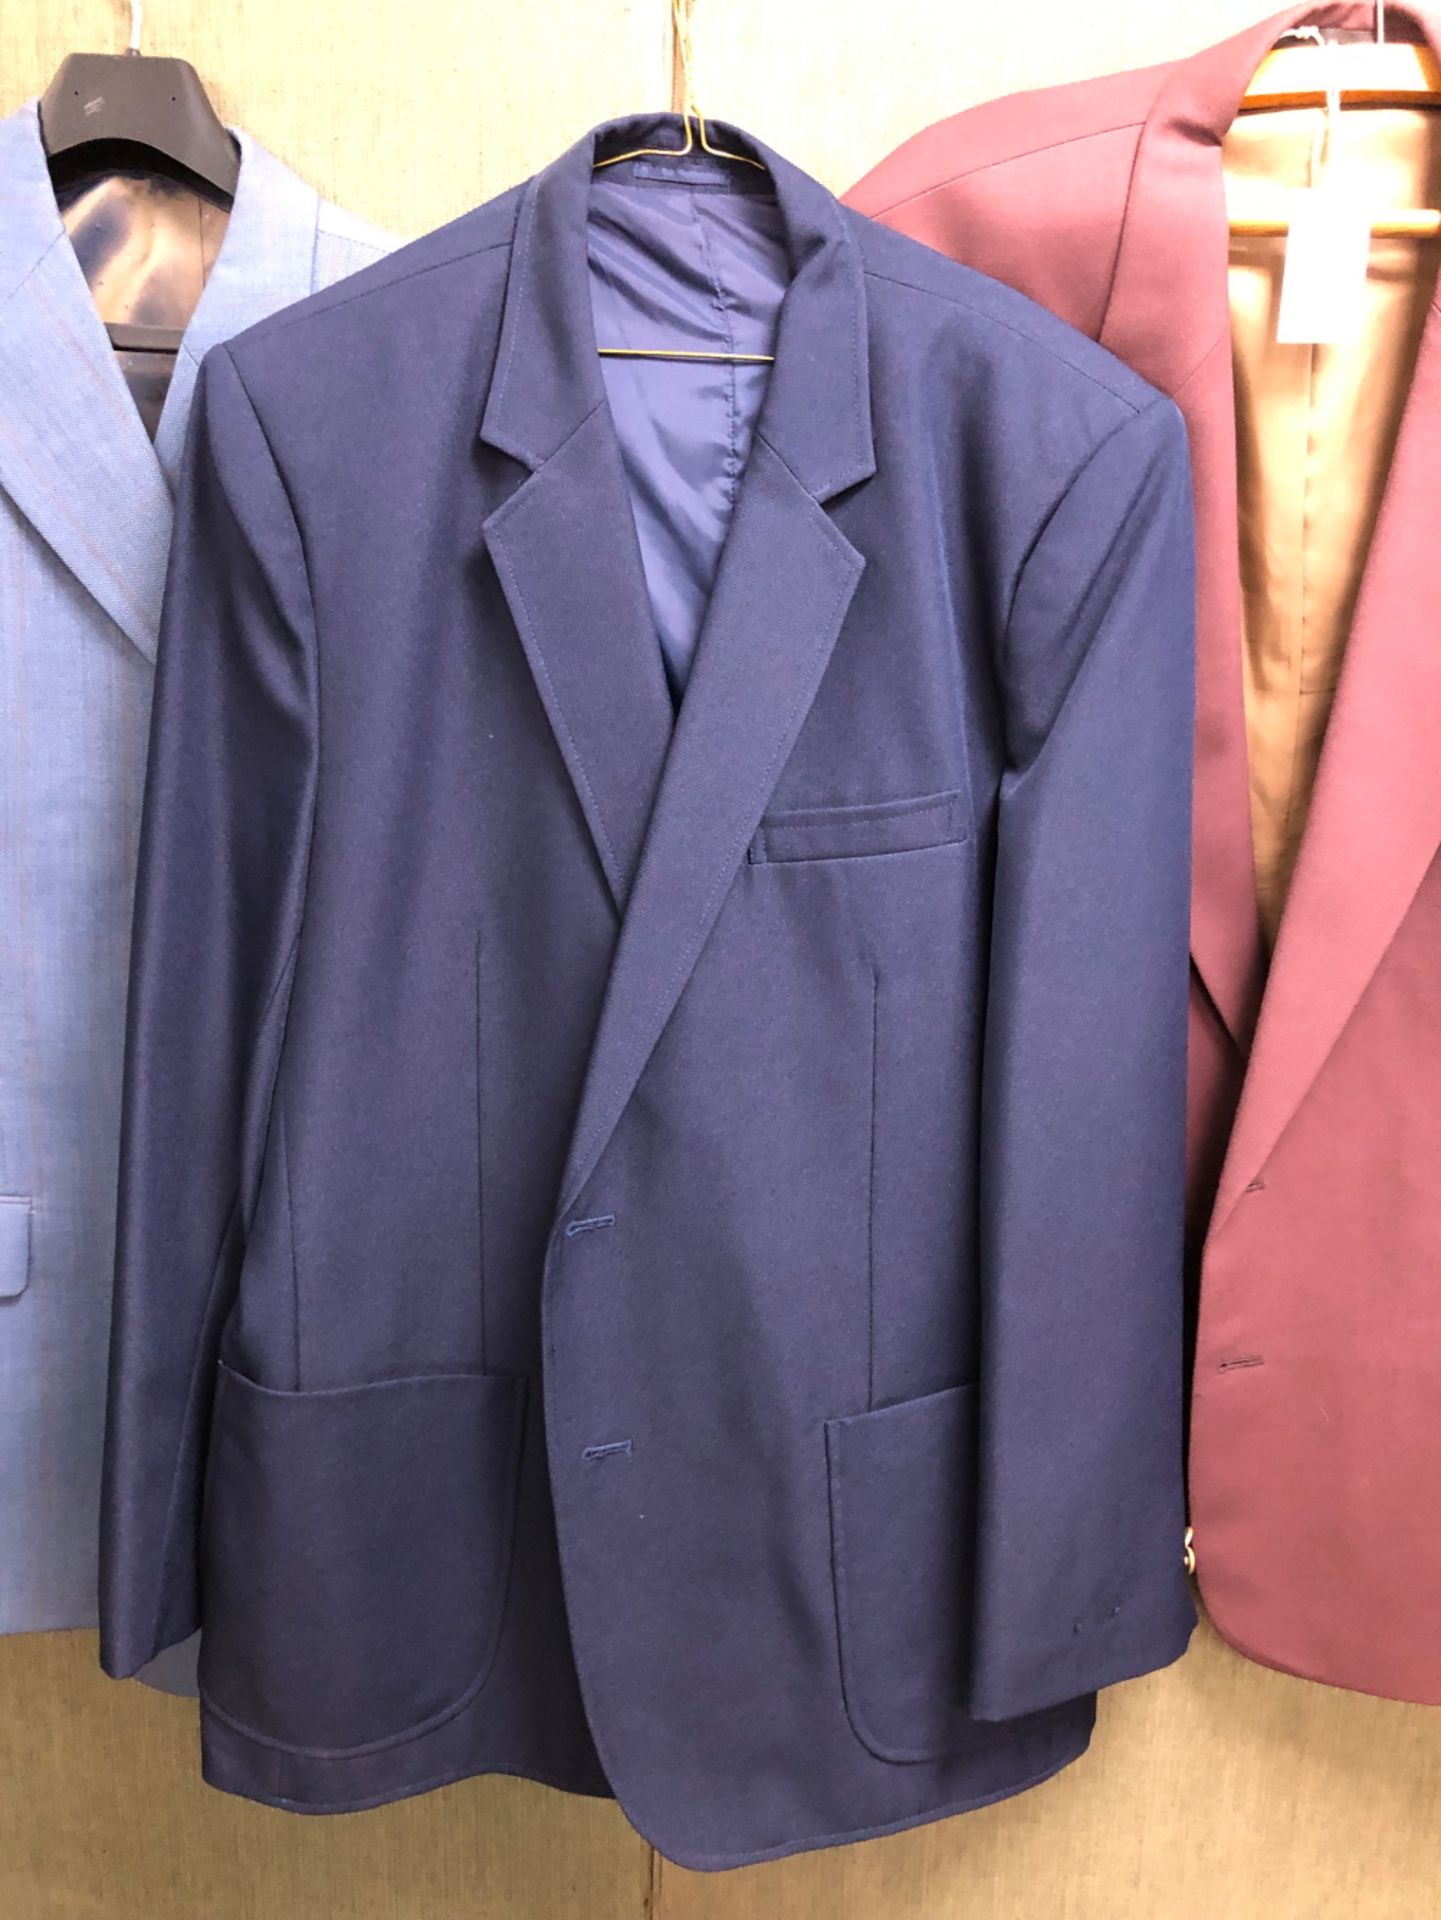 GENTS JACKETS: DEBENHAMS, BROWN WOOL, CHEST 42", A DIGEL, PALE BLUE WOOL WITH SUBTLE BROWN CHECK, - Image 2 of 9